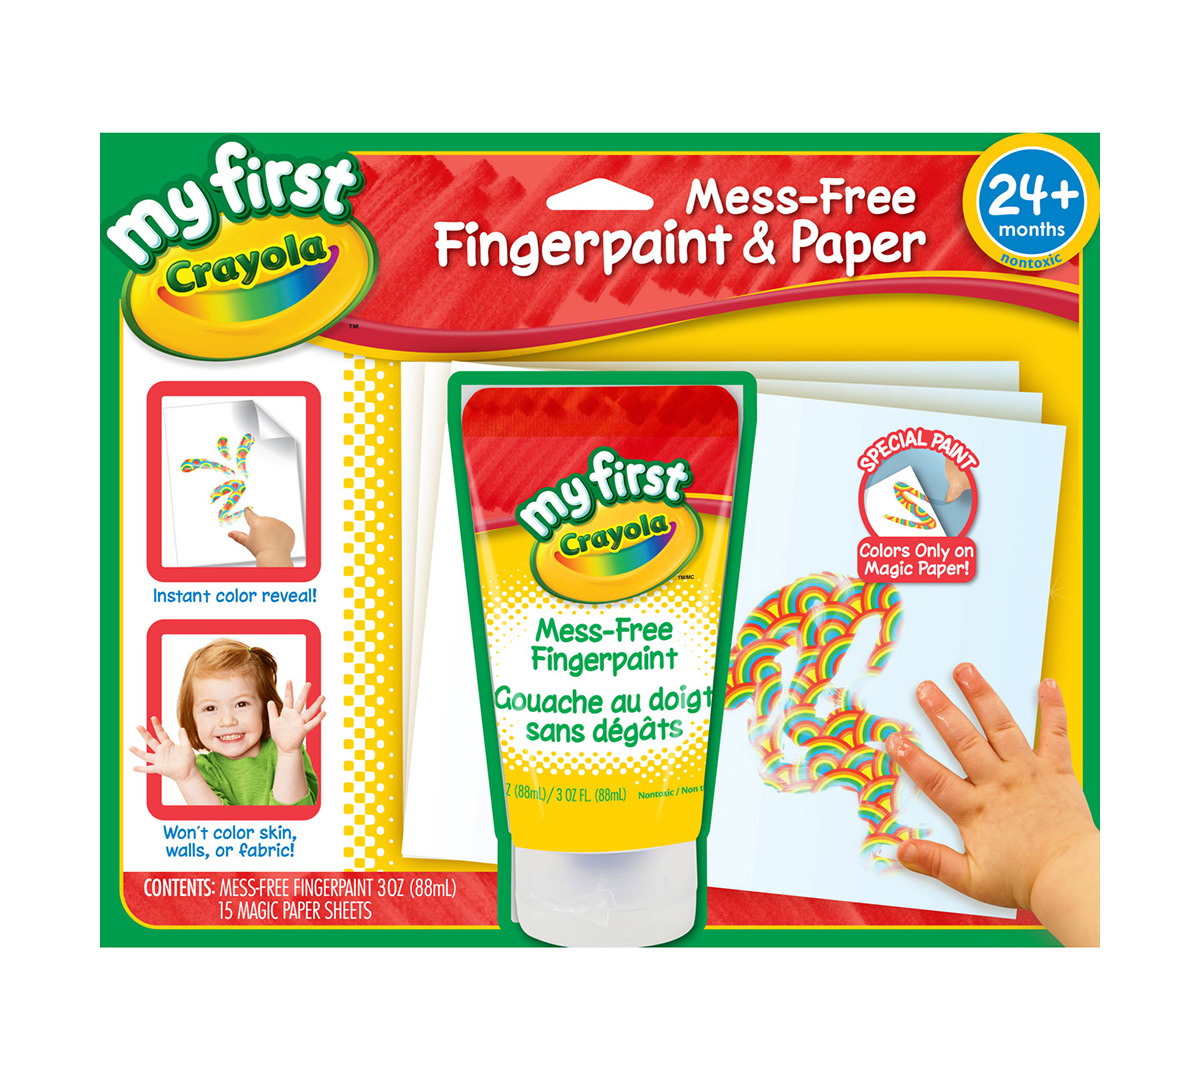 Download My First Crayola Mess-Free Fingerpaint and Paper | Crayola